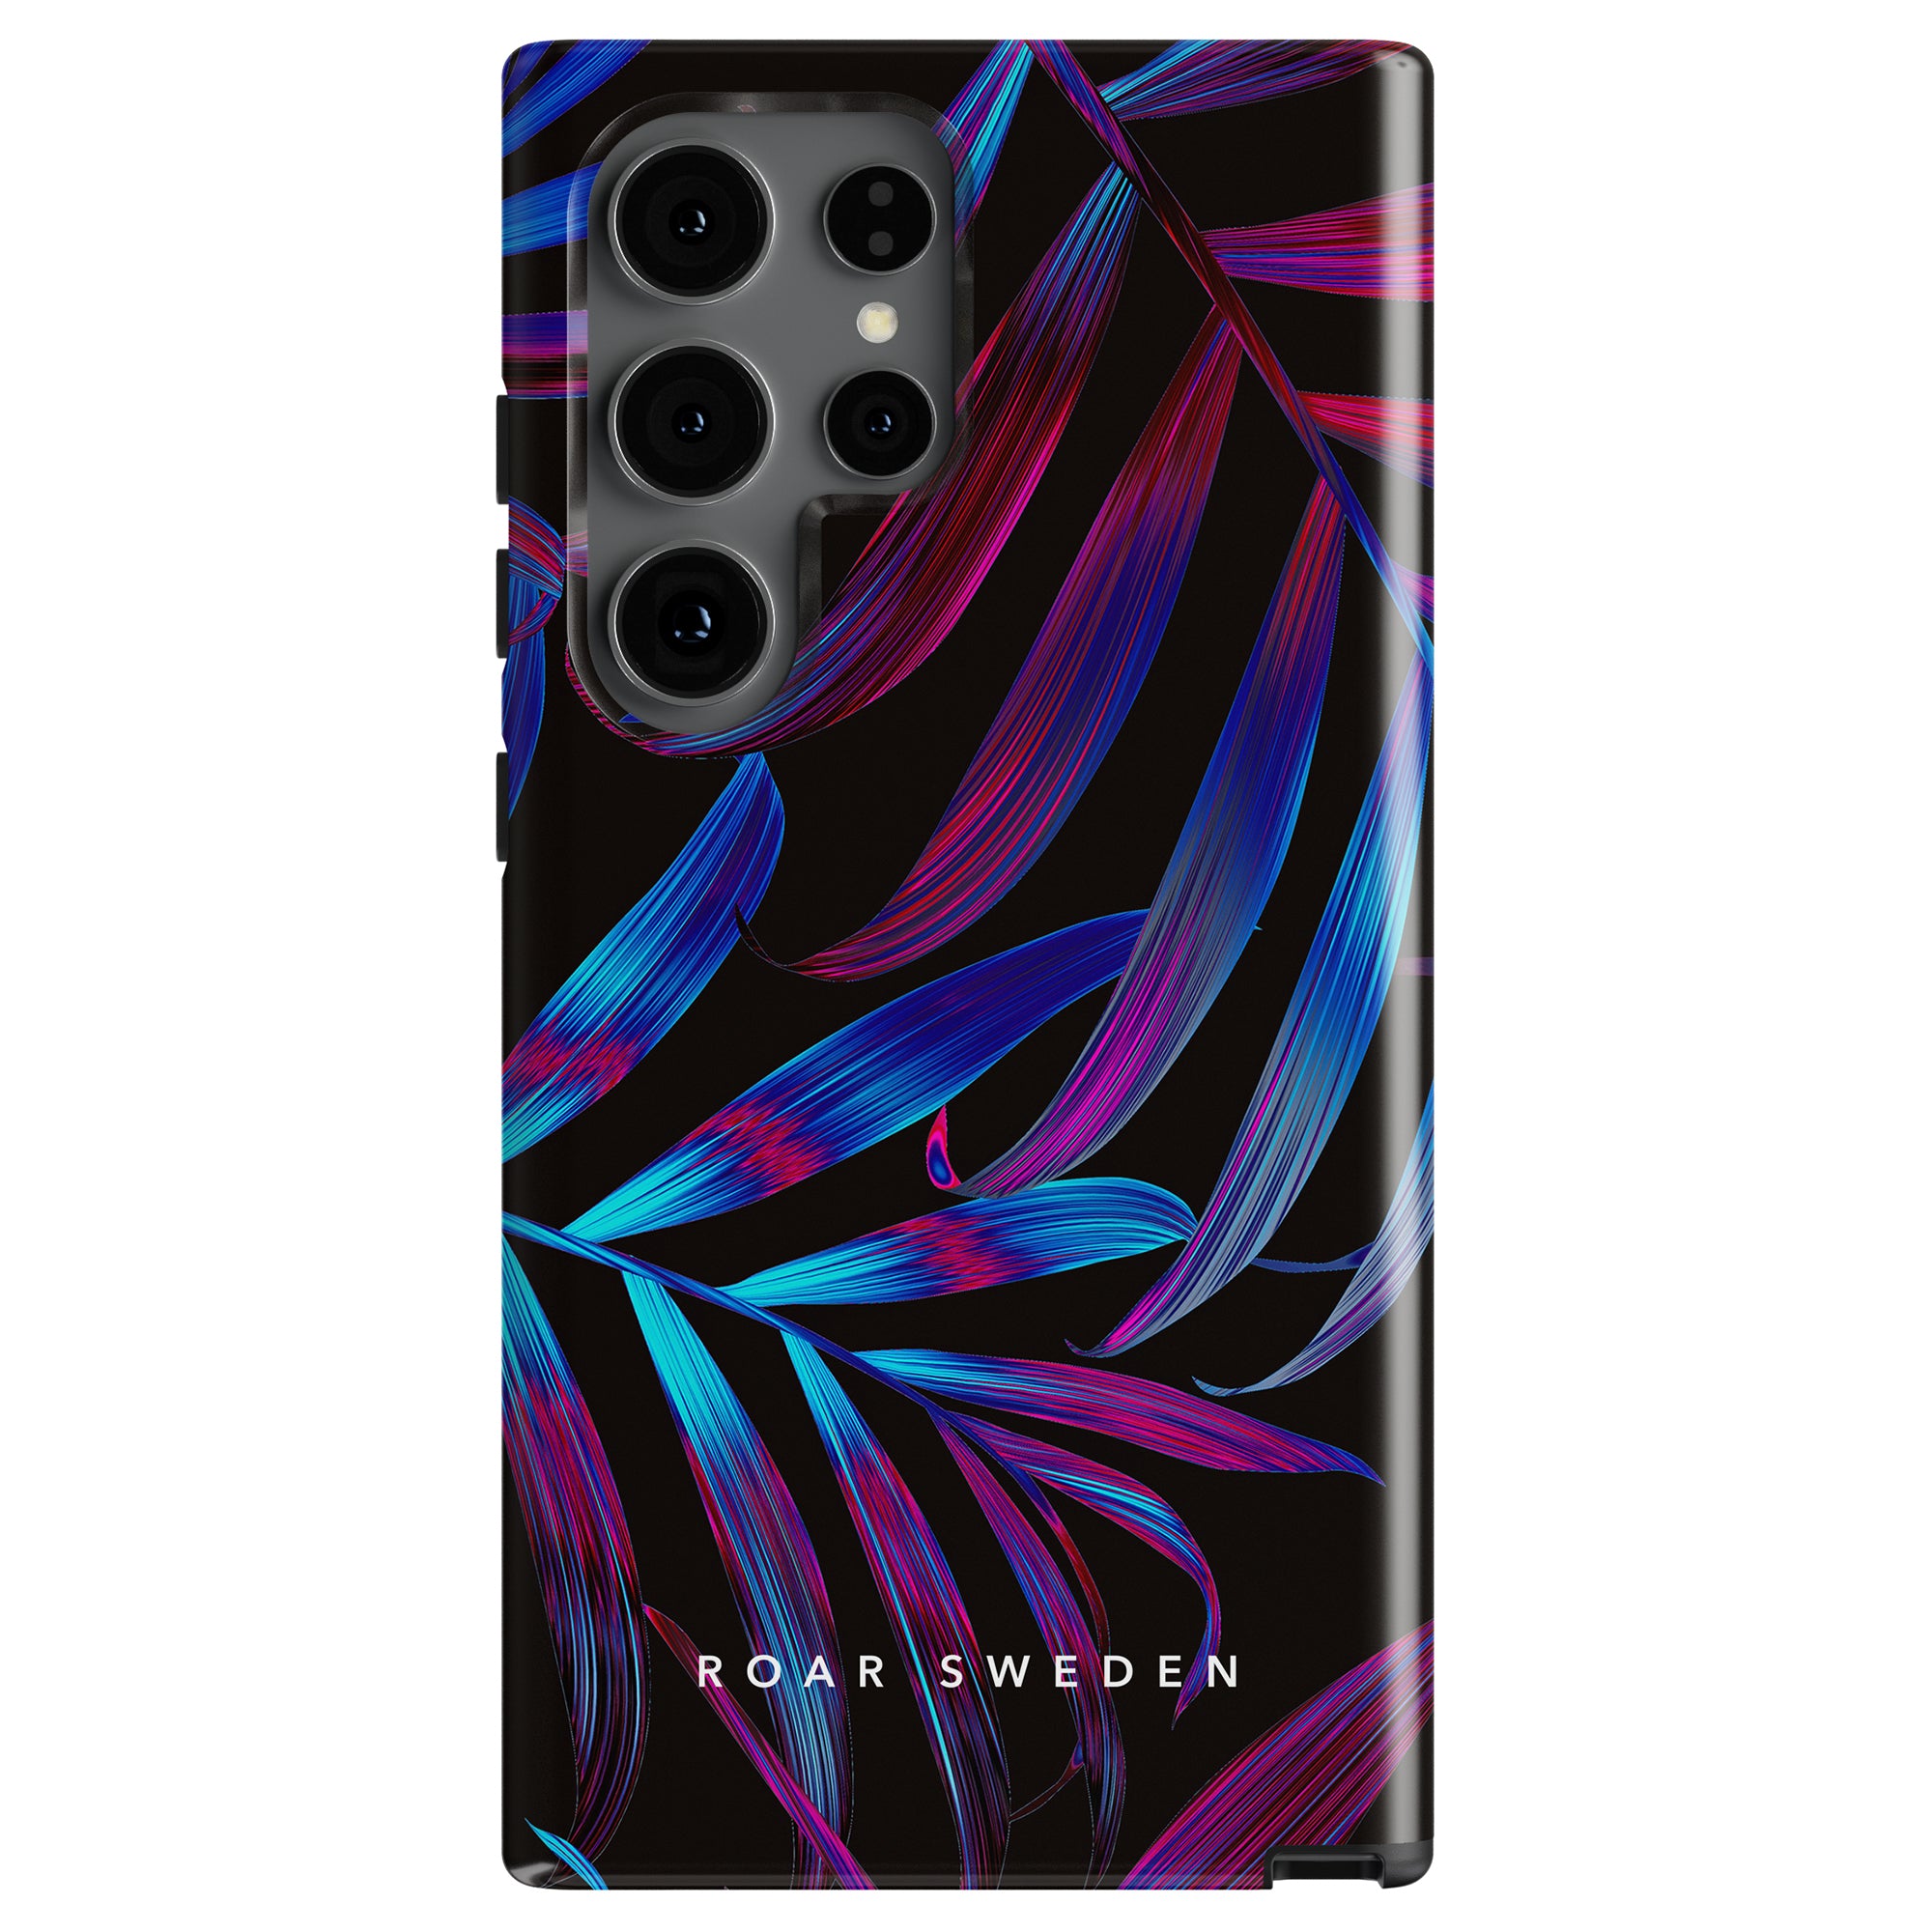 Back view of a smartphone in a colorful case with blue and purple palm leaf design. The words "Roar Sweden" are written at the bottom of the case. Experience the Bioluminescence - Tough case with its vibrant hues and robust skydd mobilskal, ensuring your phone is protected in style.